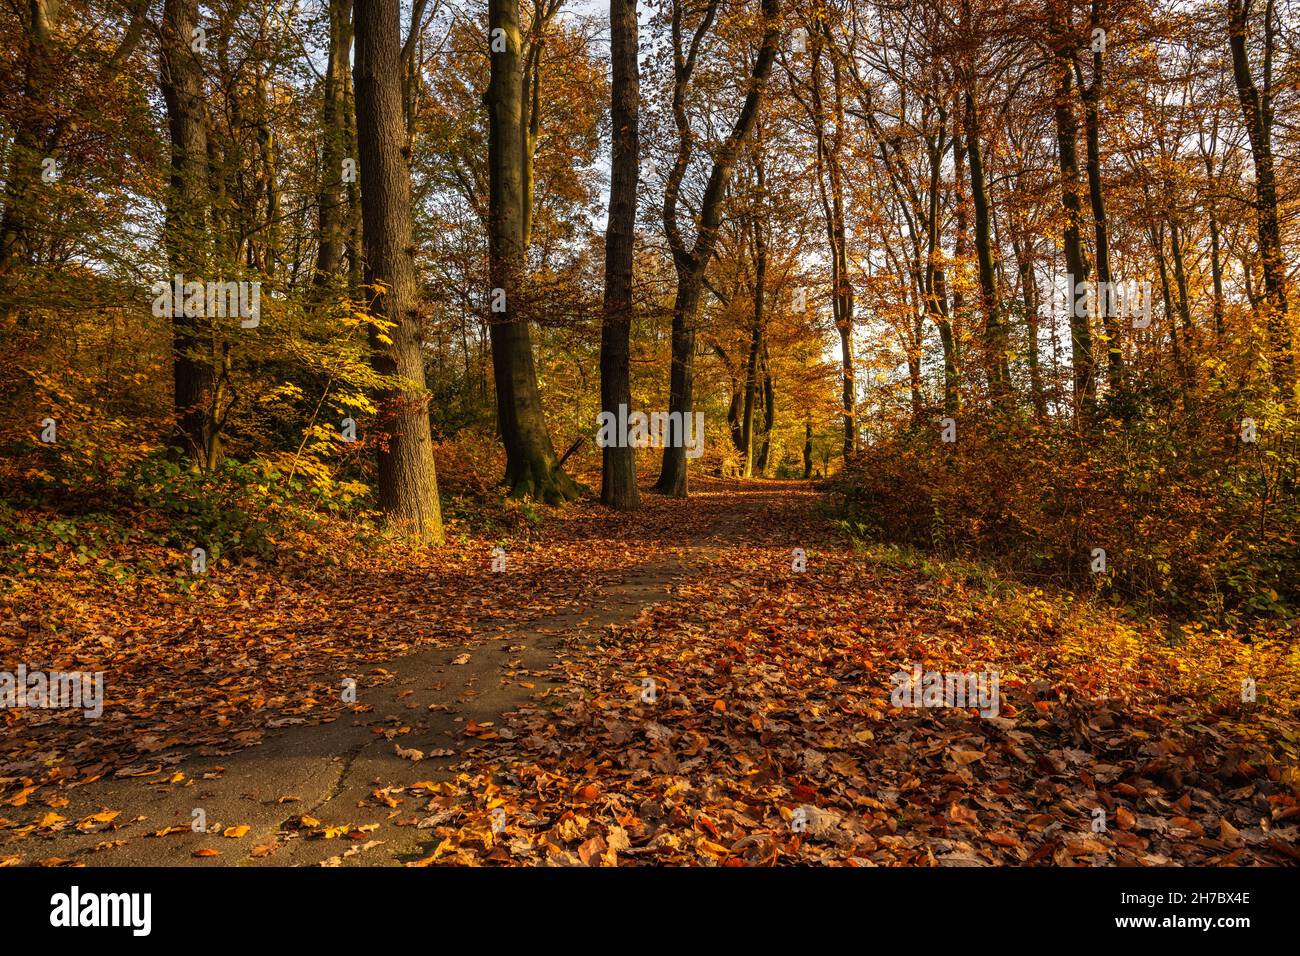 typical autumn scene in a forest in Mülheim an der Ruhr, district of Speldorf, Germany. Colors ranging from green, yellow to orange. The ground is cov Stock Photo